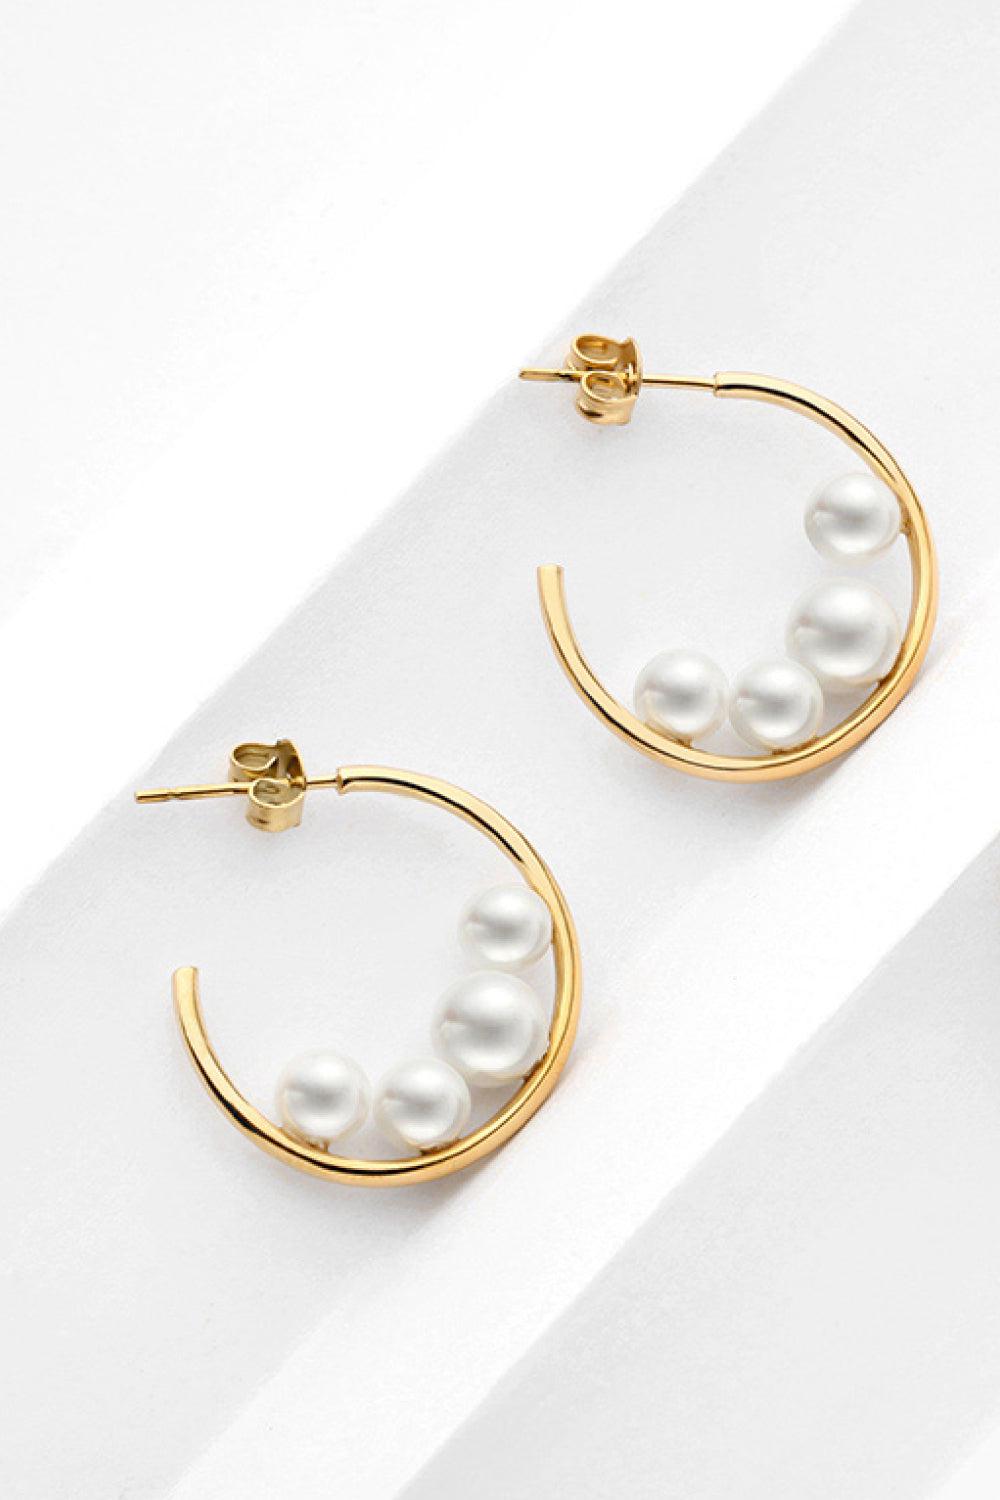 Can't Stop Your Shine Pearl C-Hoop Earrings BLUE ZONE PLANET